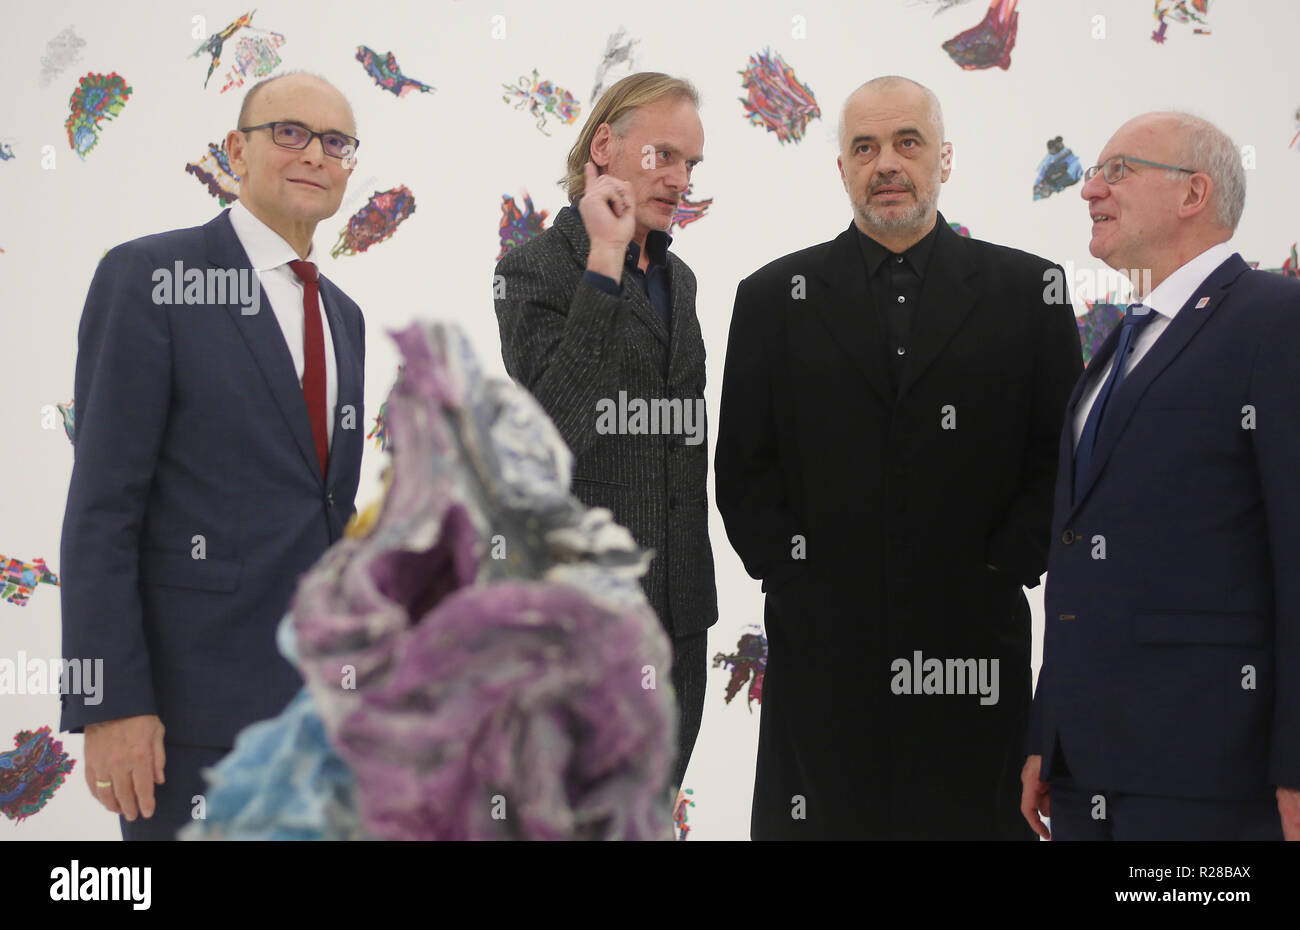 Rostock, Germany. 17th Nov, 2018. Erwin Sellering (SPD, l-r), the former Prime Minister of Mecklenburg-Vorpommern, Uwe Neumann, Director of the Kunsthalle Rostock, Edi Rama, Prime Minister of Albania and Rostock's Lord Mayor Roland Methlig, will examine works by Edi Rama. The Albanian politician and artist is exhibiting his works under the title 'Works' in the White Cube of the Kunsthalle until 6 January 2019. Credit: Danny Gohlke/dpa/Alamy Live News Stock Photo